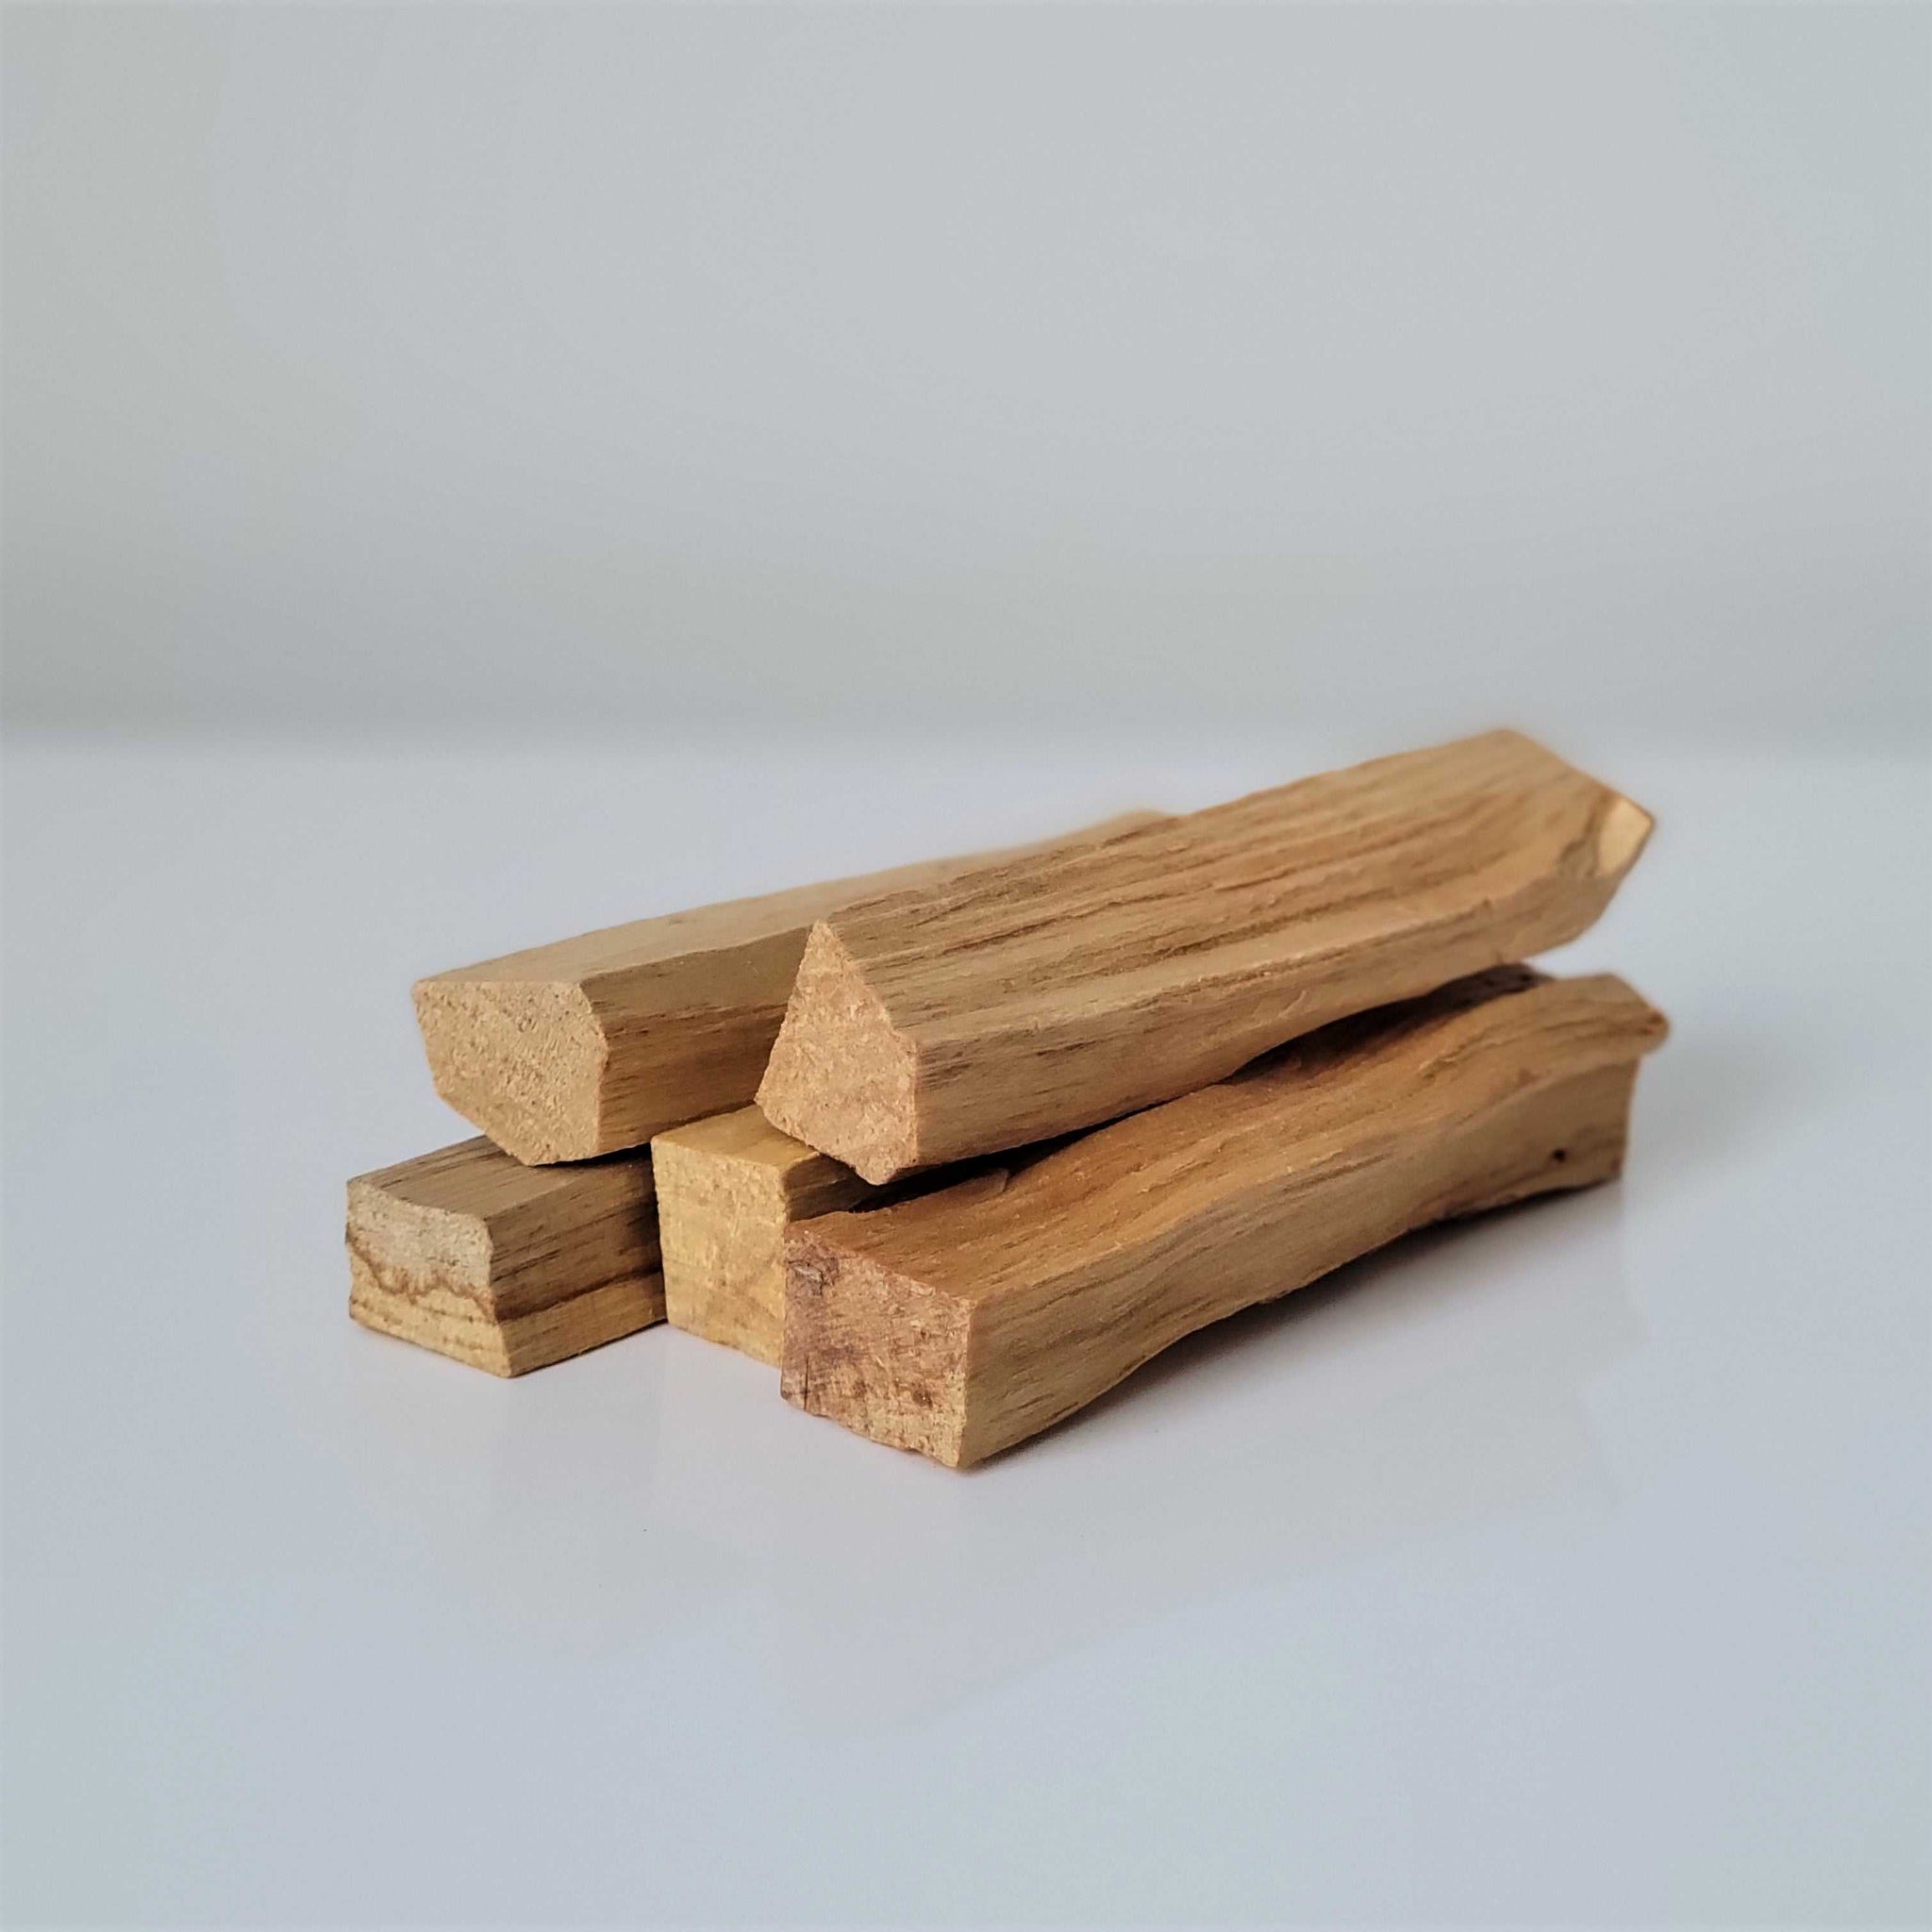 Palo Santo Wood *Certified by Serfor